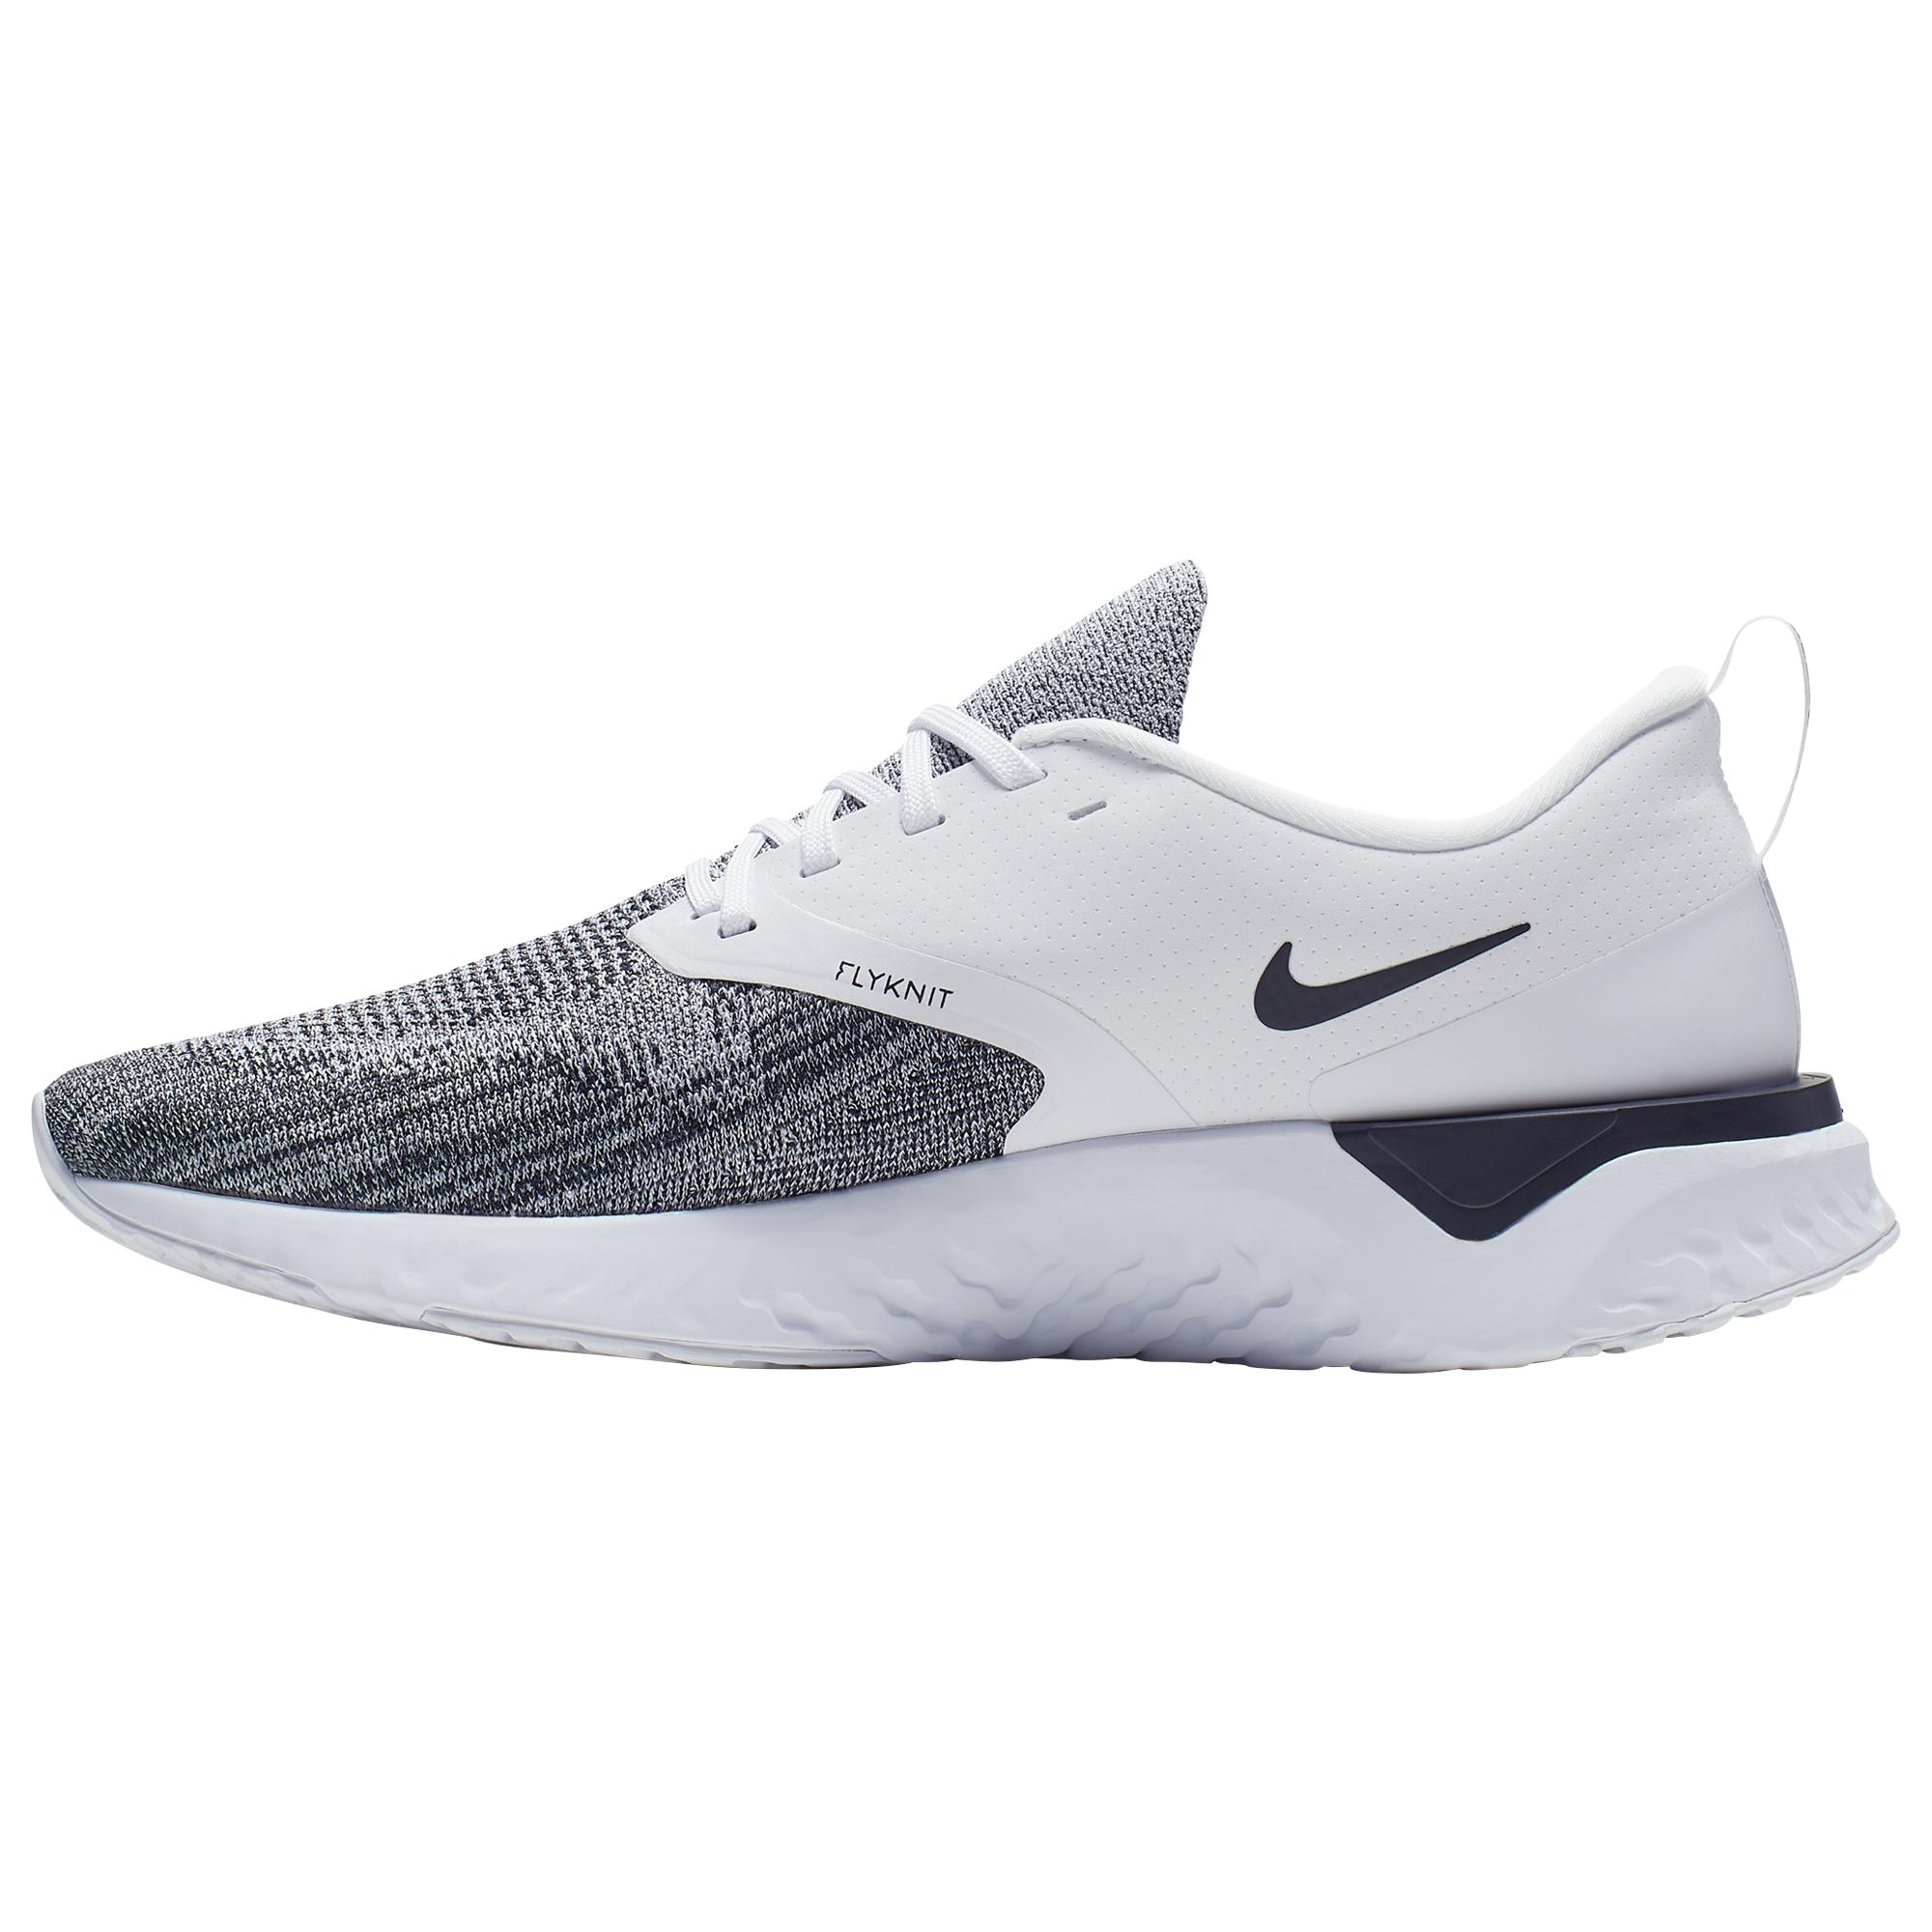 Nike Odyssey React Eastbay Flash Sales, 55% OFF | lagence.tv